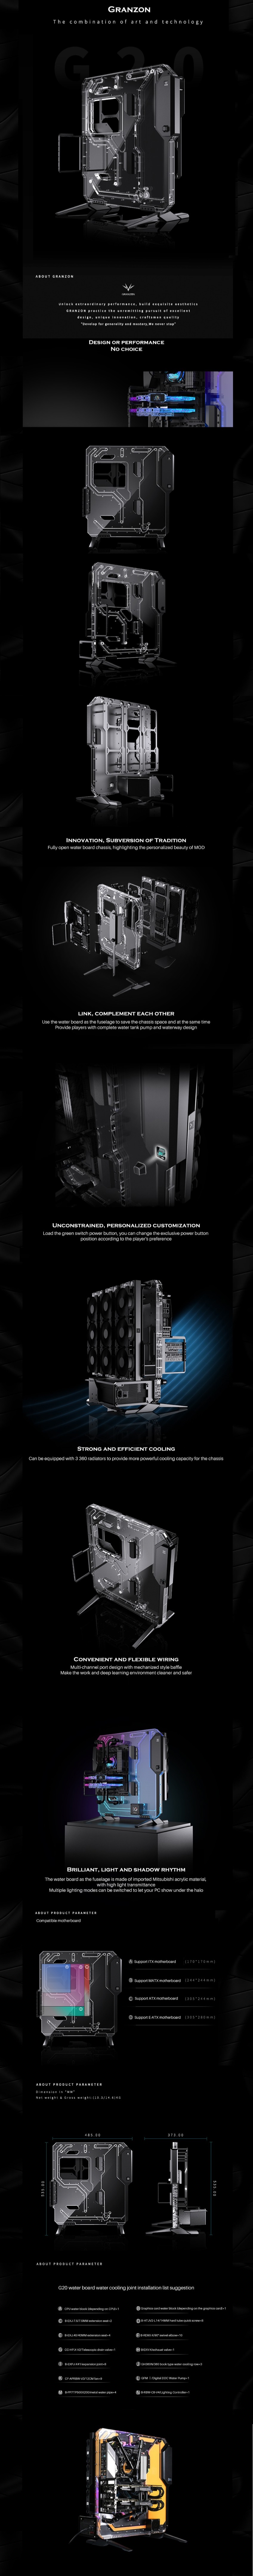 A large marketing image providing additional information about the product Bykski Granzon G20 Distro Water Cooling Case - Additional alt info not provided